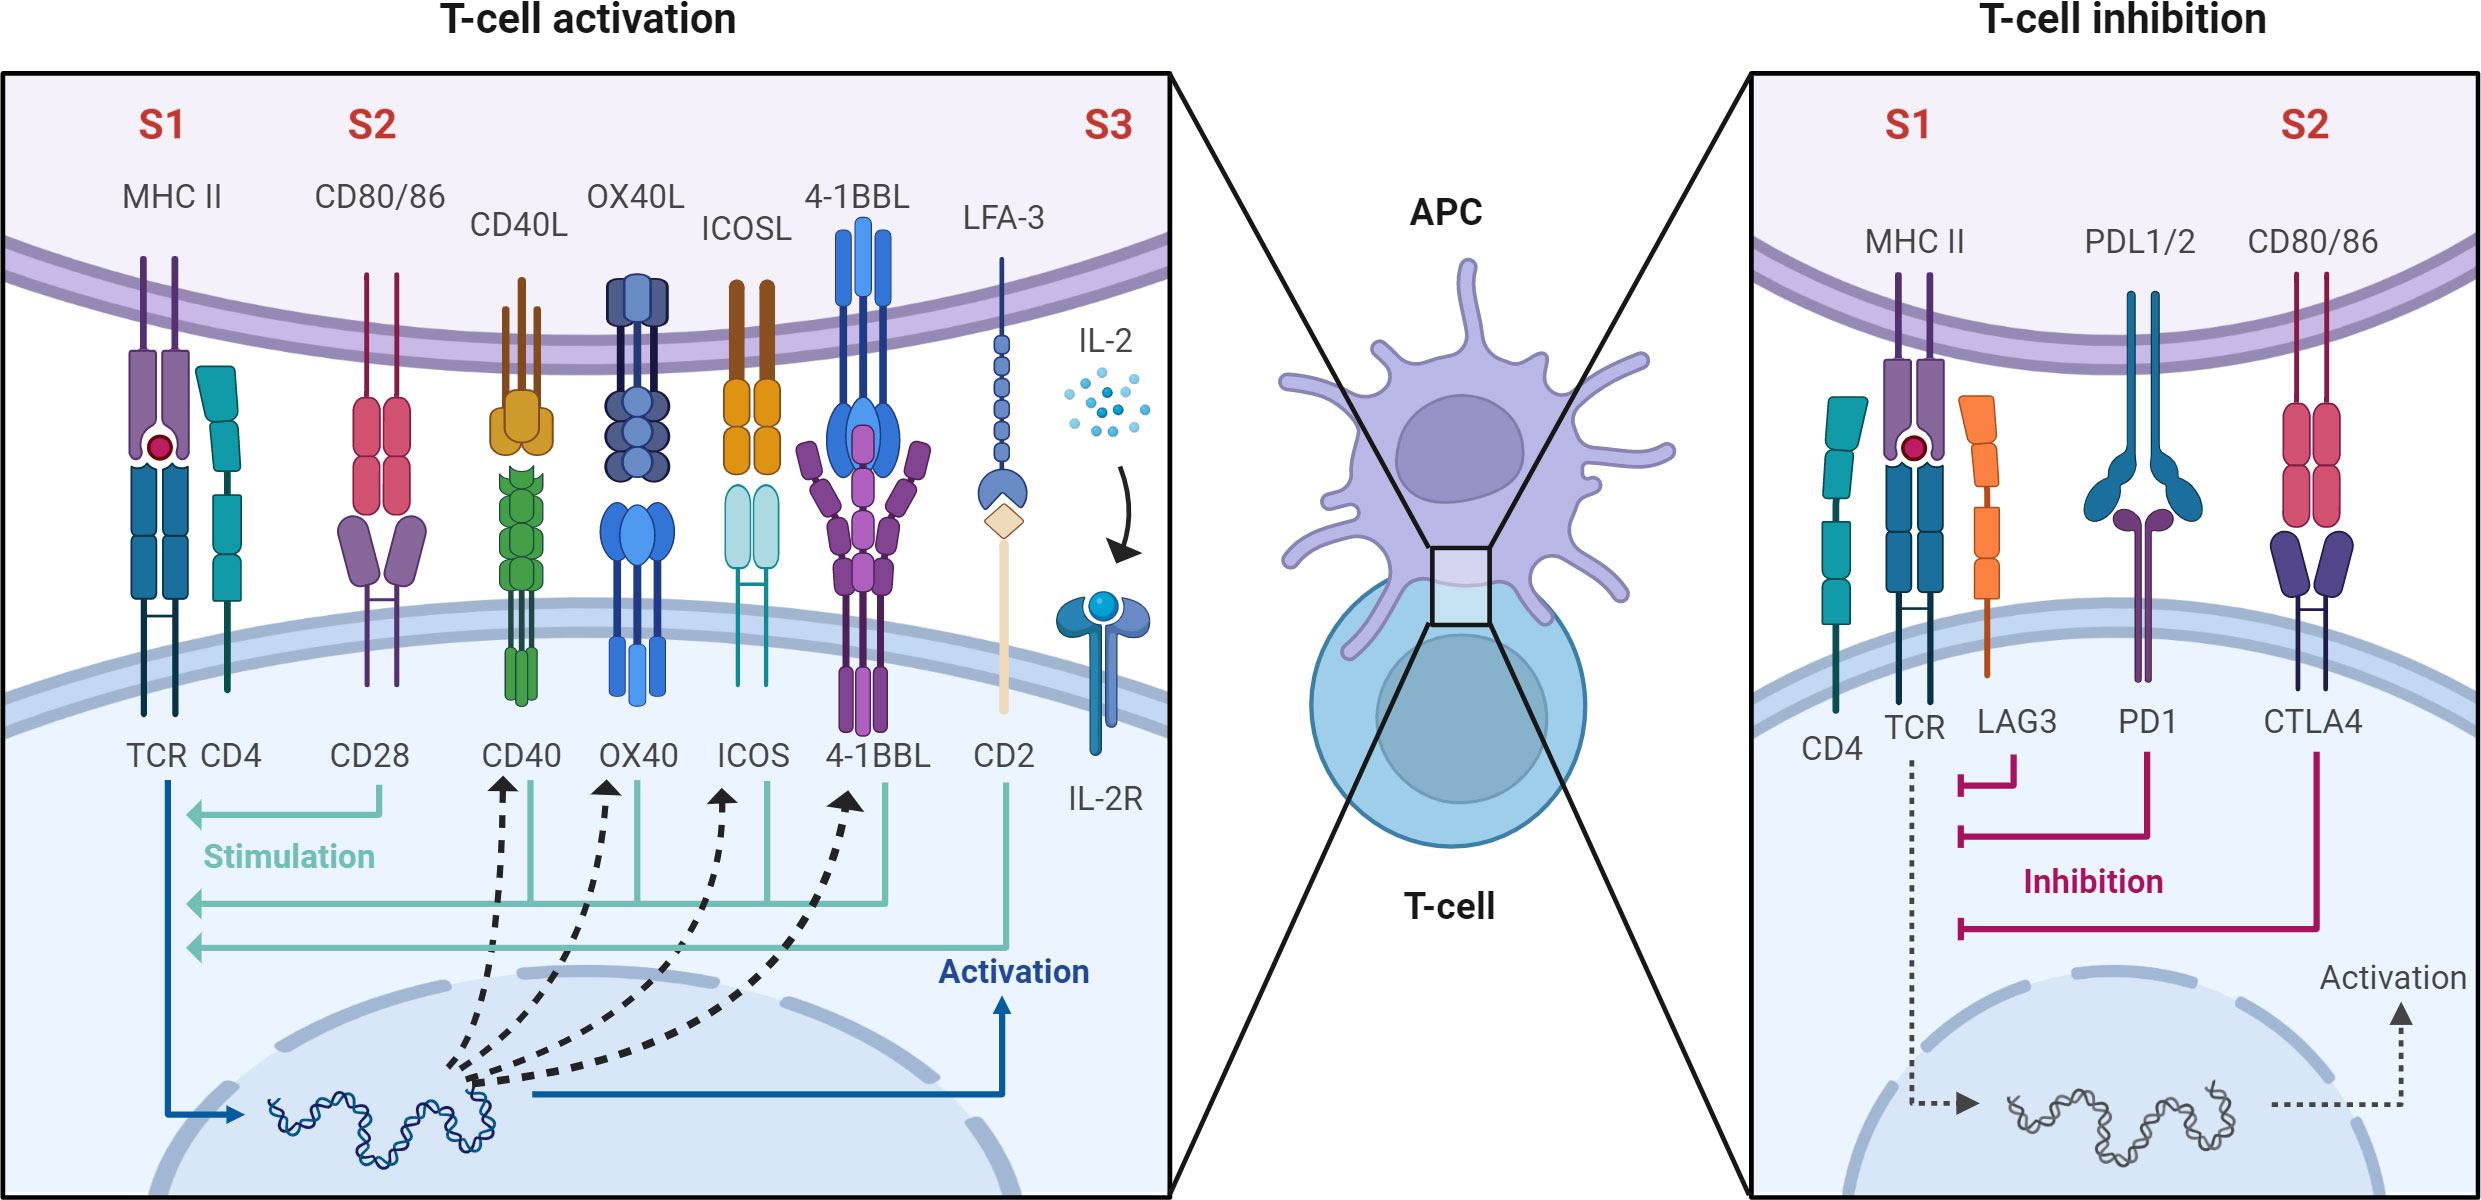 Analysis of the B cell receptor repertoire in six immune-mediated